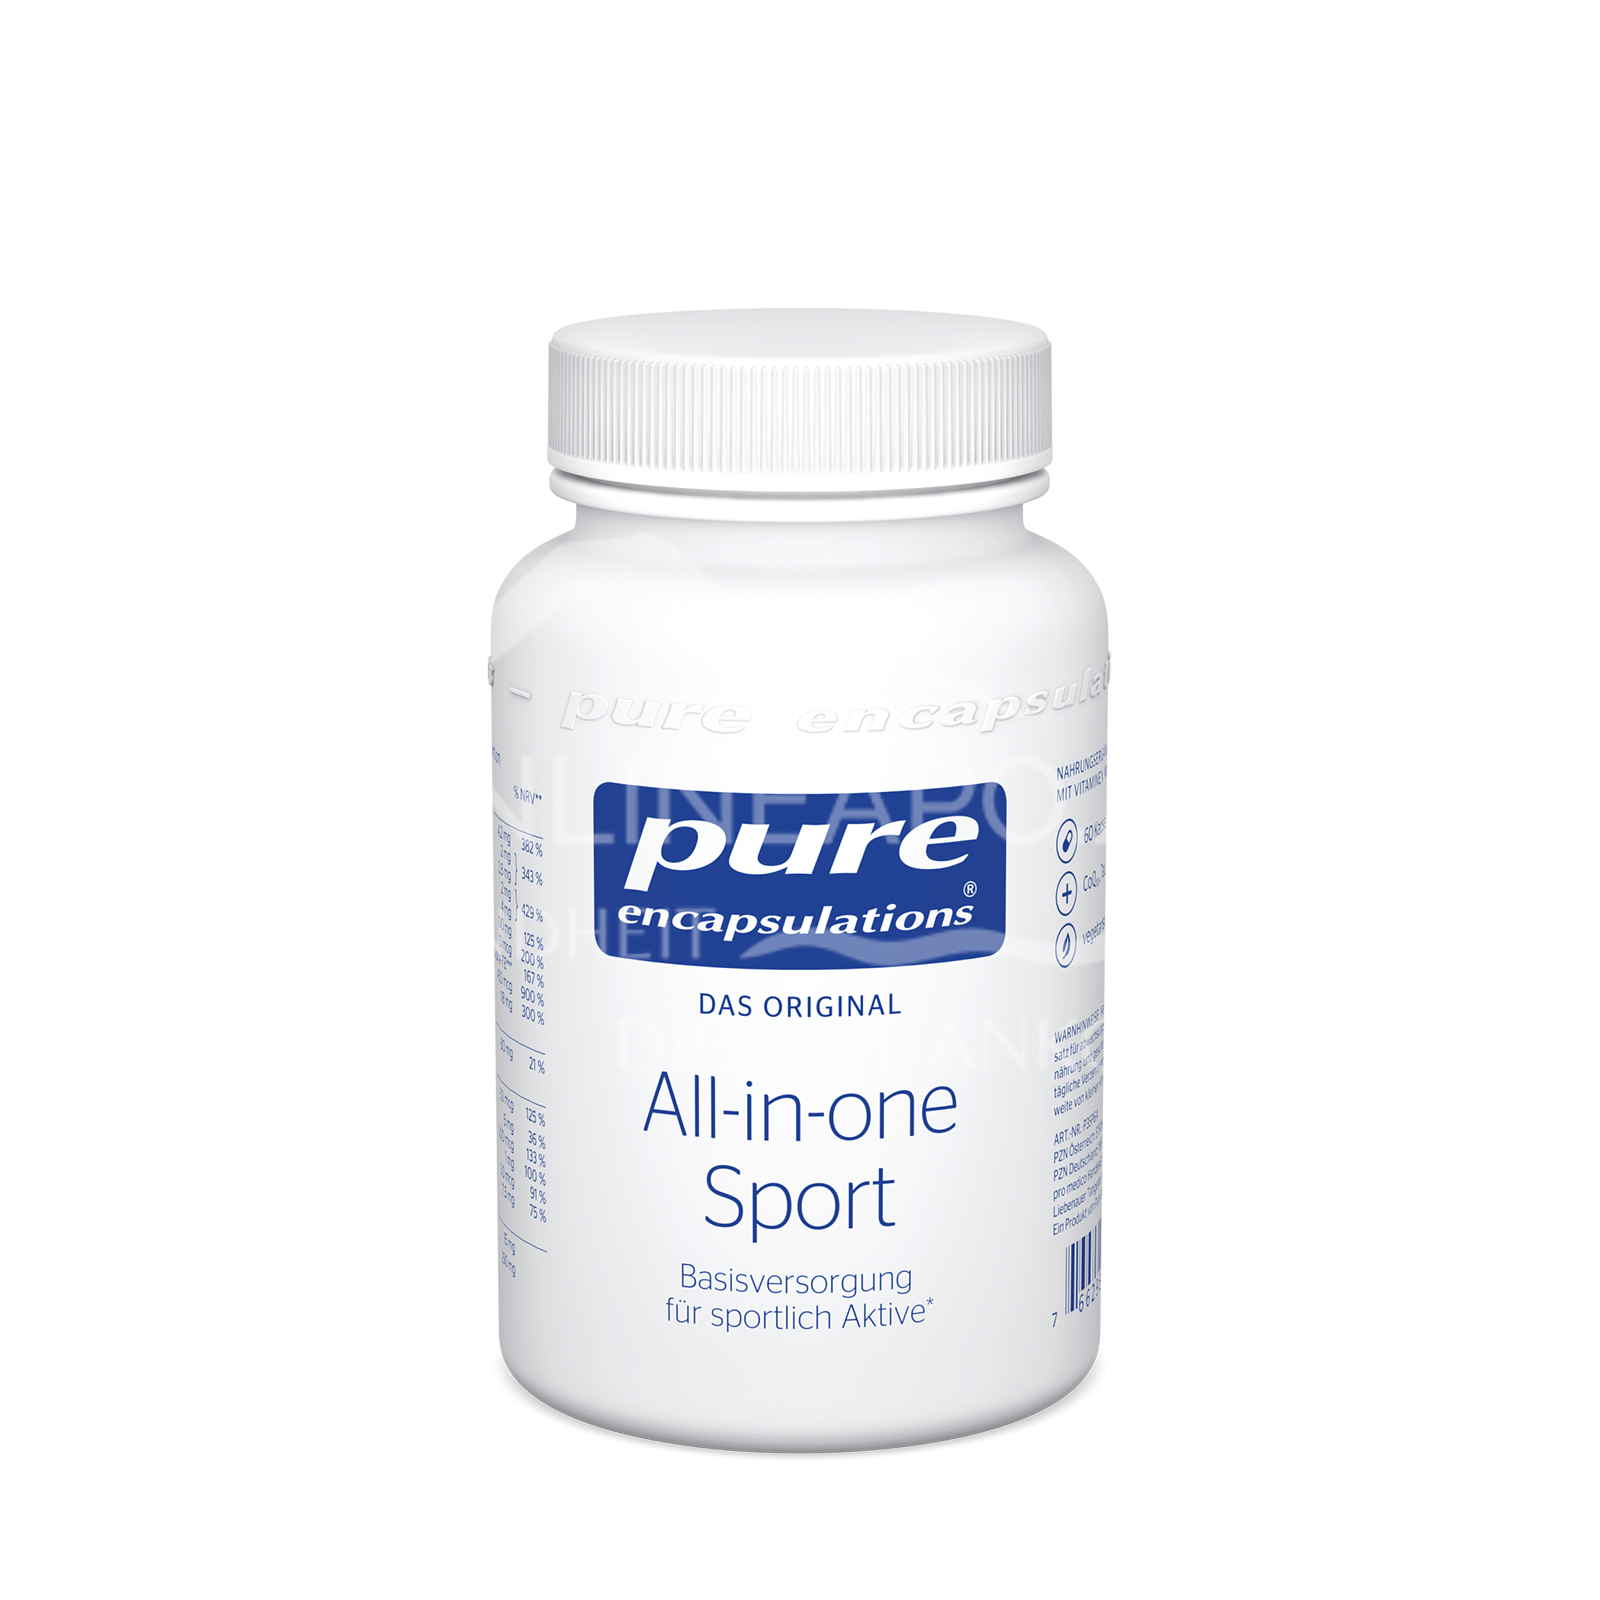 pure encapsulations® All-in-one Sport Kapseln